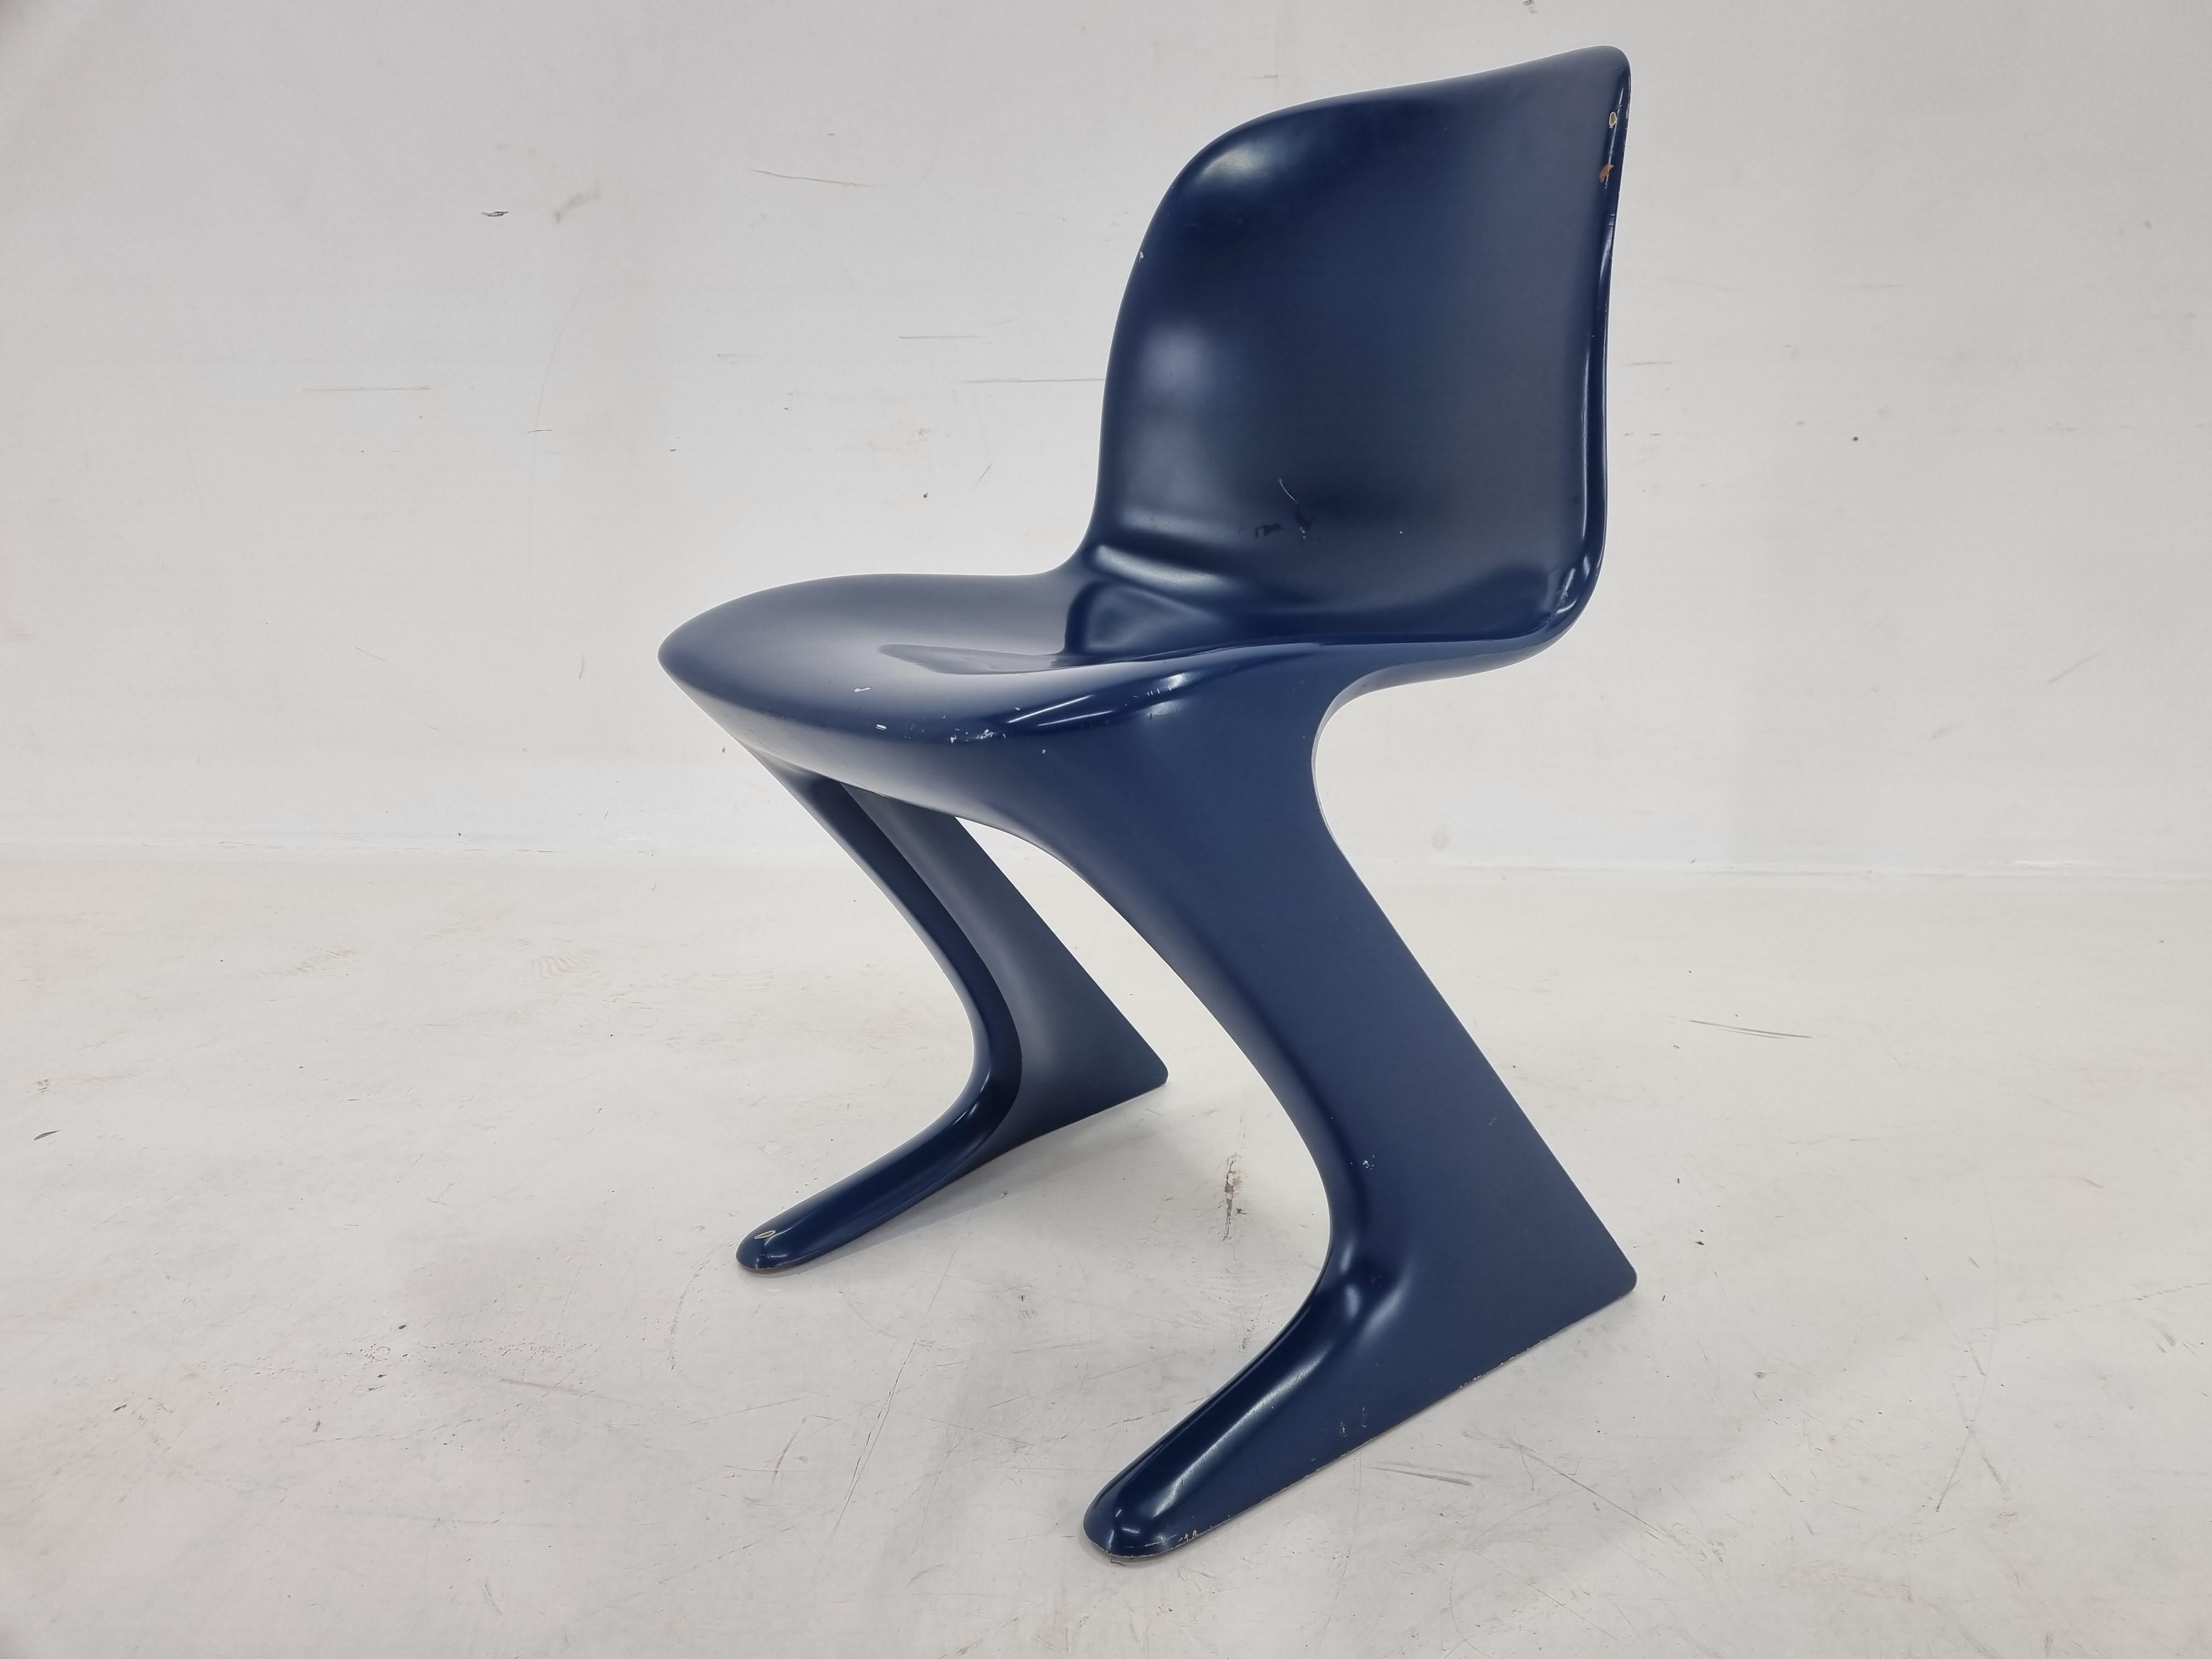 Midcentury Blue Kangaroo Chair Designed by Ernst Moeckl, Germany, 1960s For Sale 2